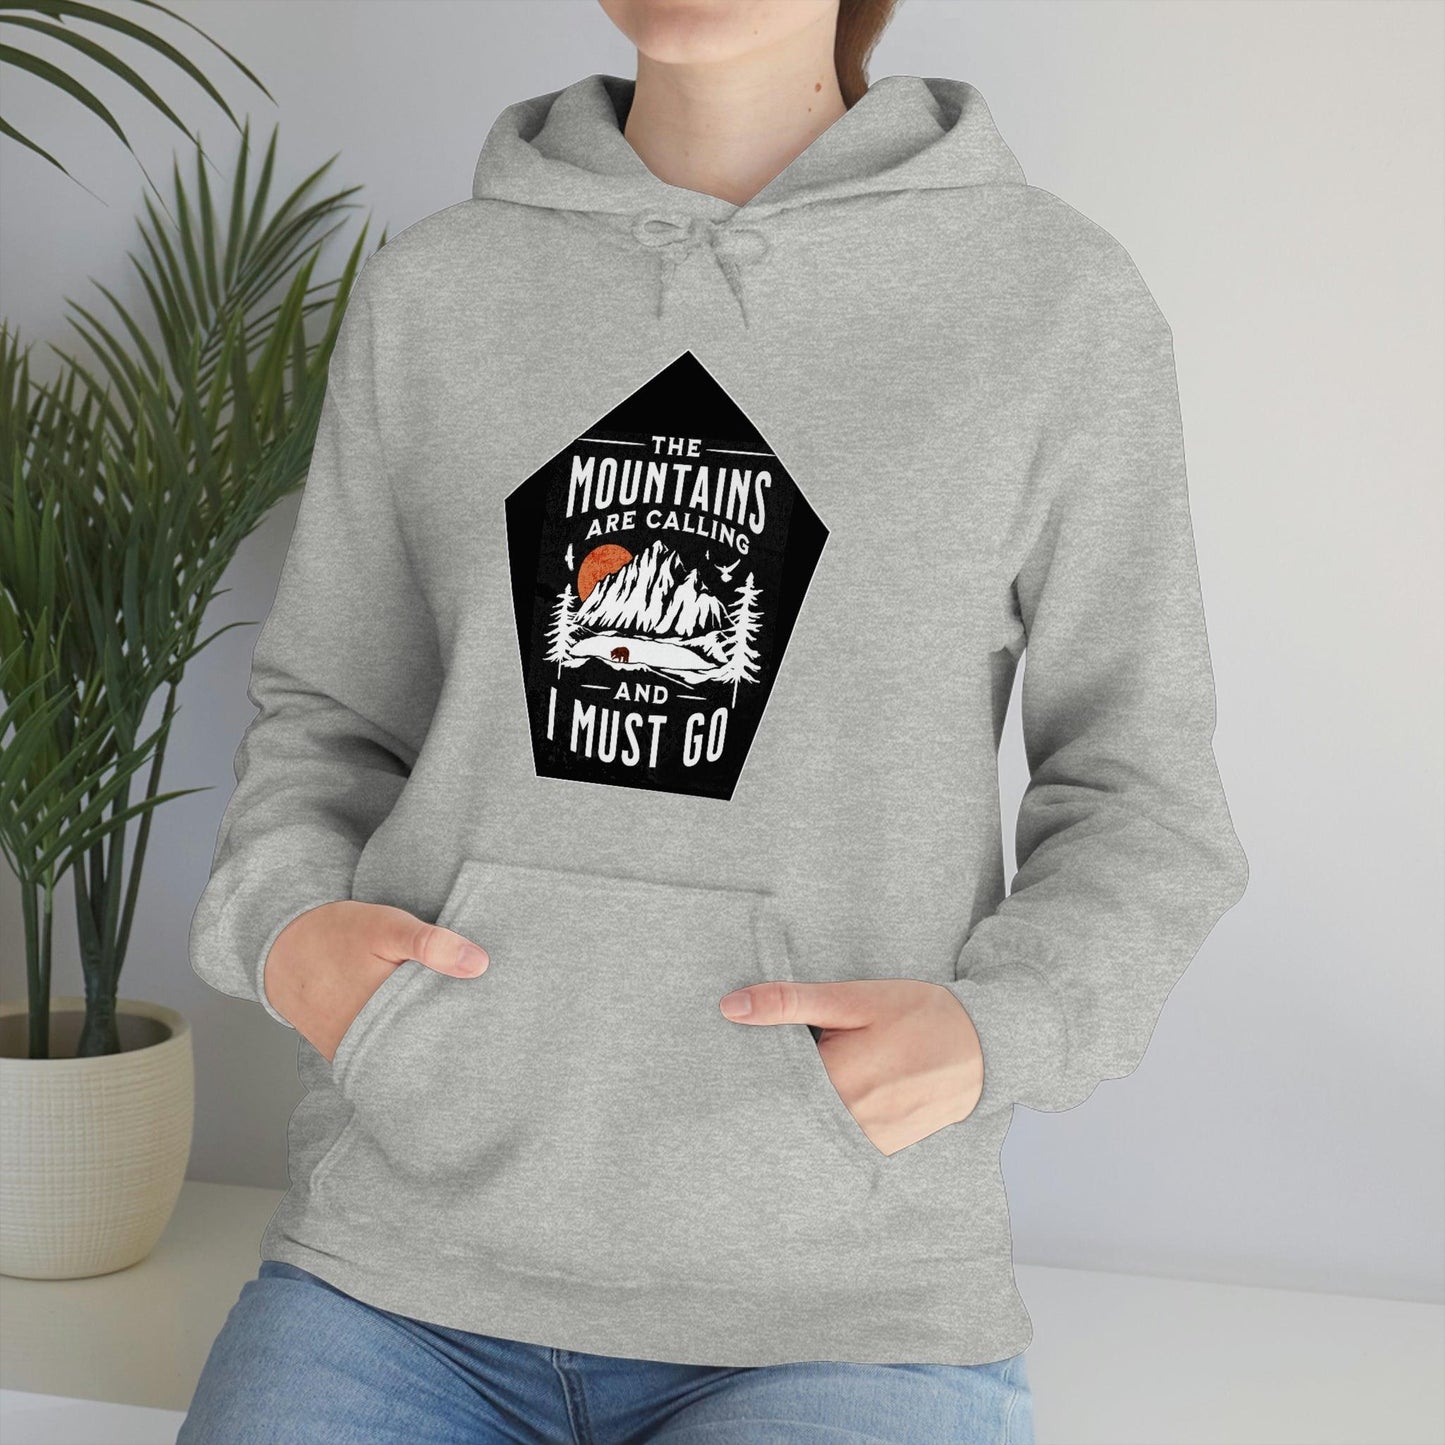 The Mountains are Calling and I Must Go, Hooded Sweatshirt